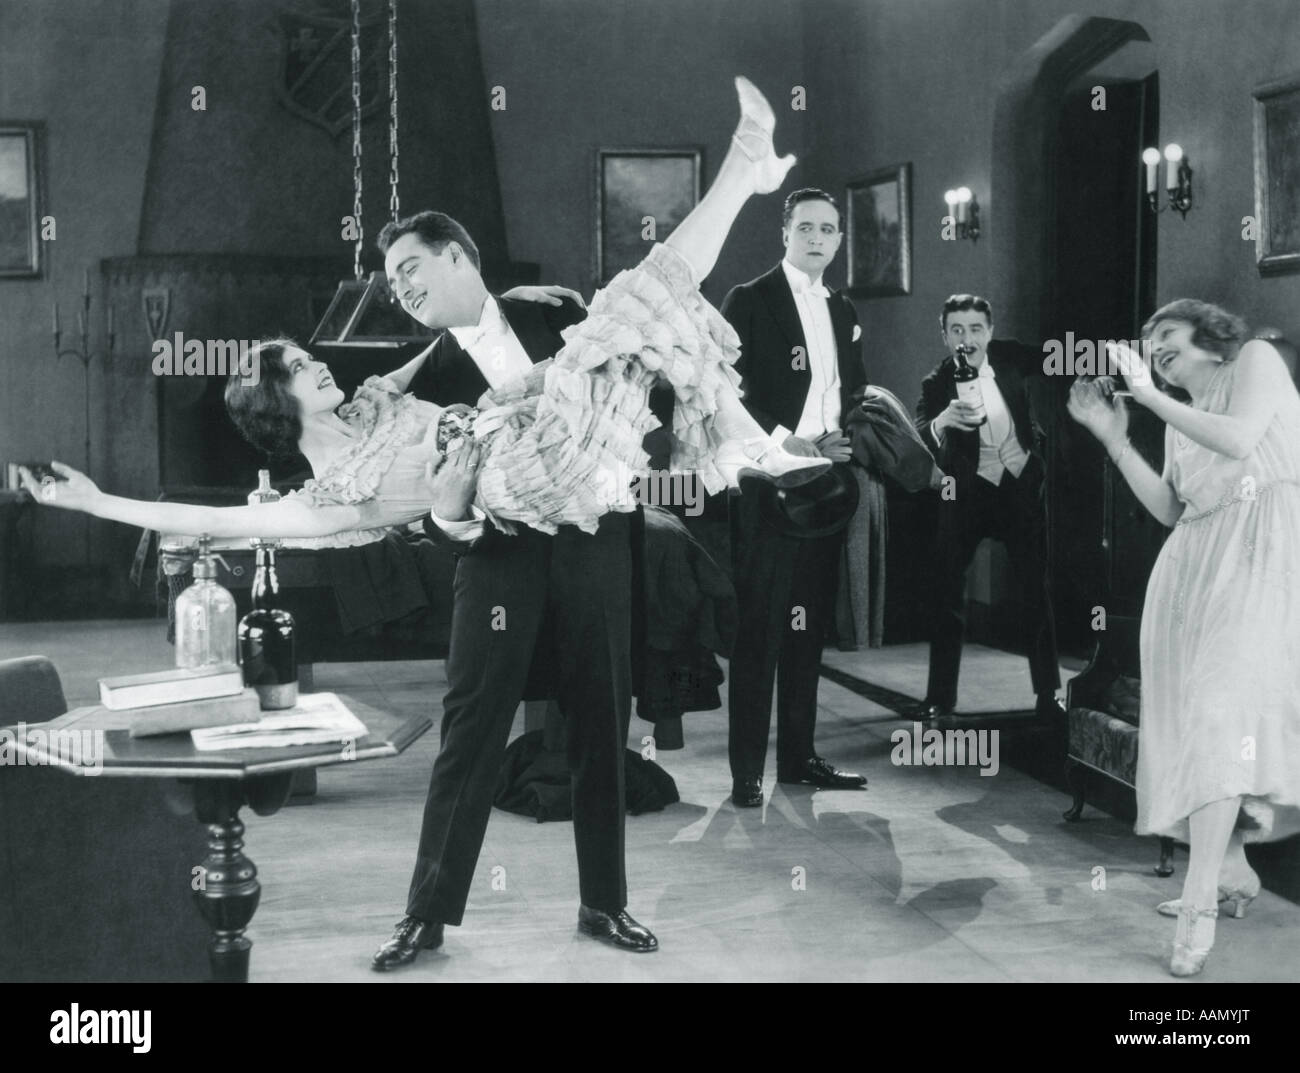 1920s MOVIE STILL OF WILD PARTY WITH WOMAN FLAPPER TURNED UPSIDE-DOWN IN ARMS OF MAN DANCING Stock Photo